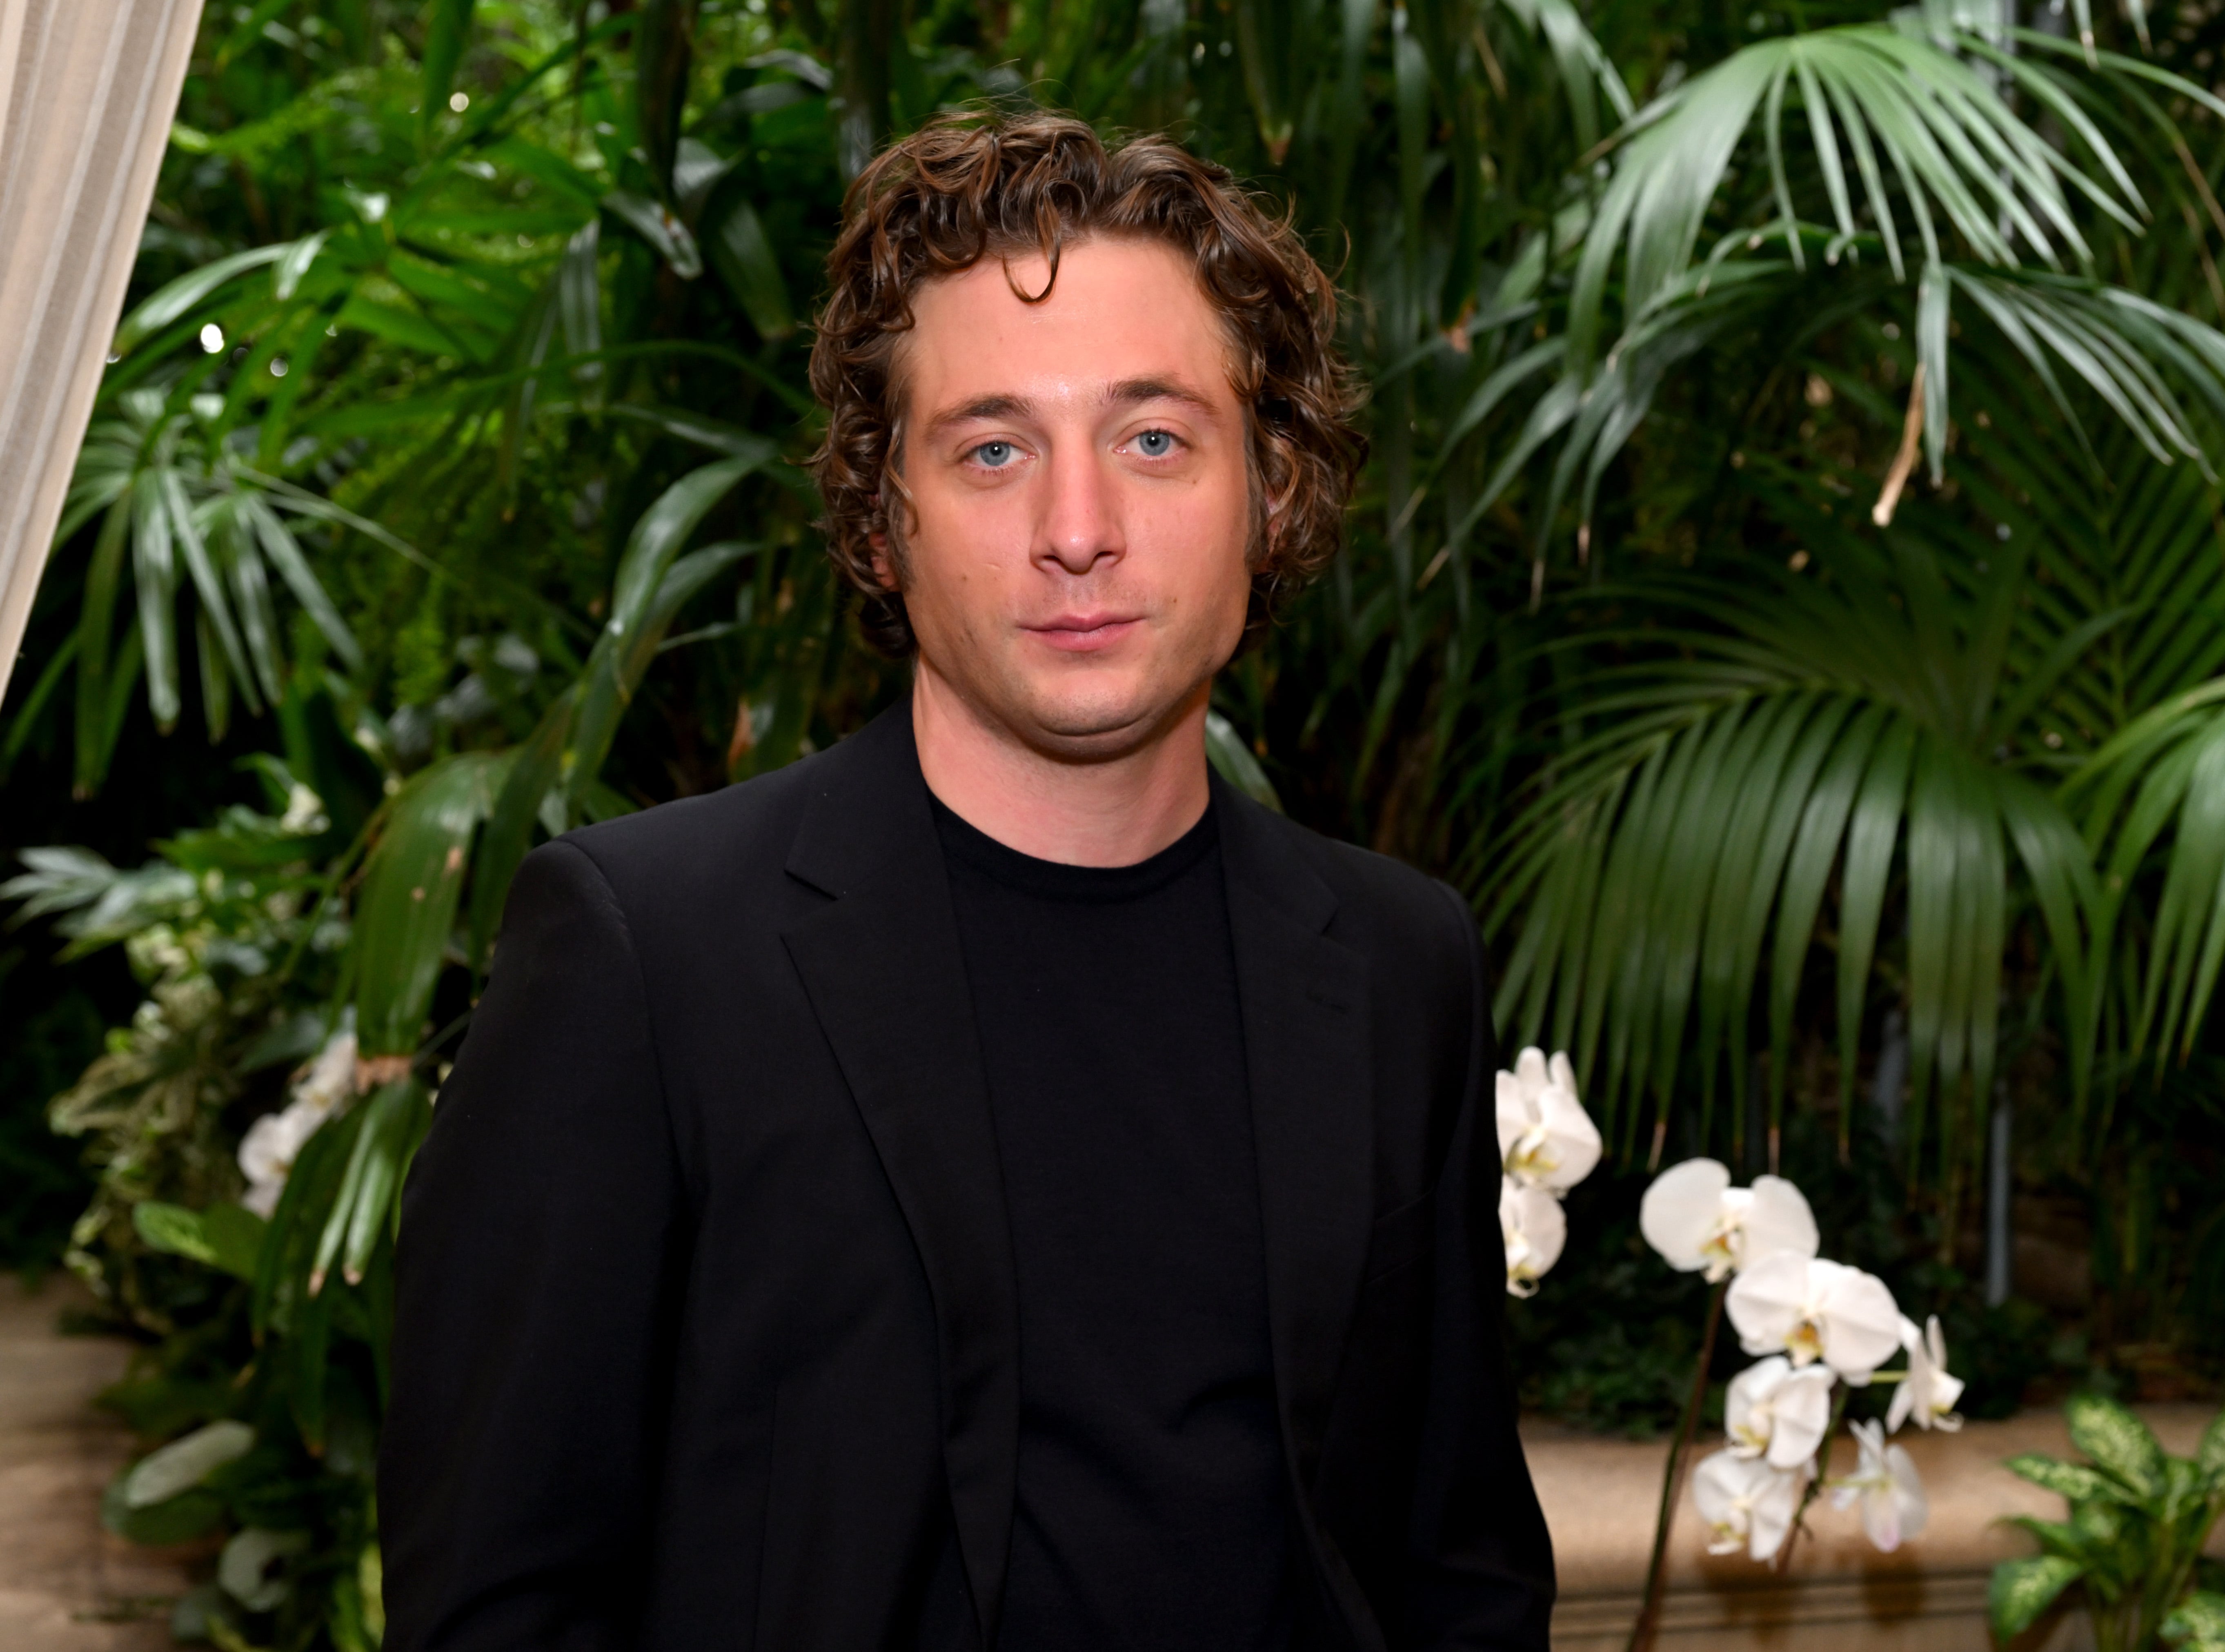 Does 'that' Jeremy Allen White ad signal a new guard of celebrity ads?